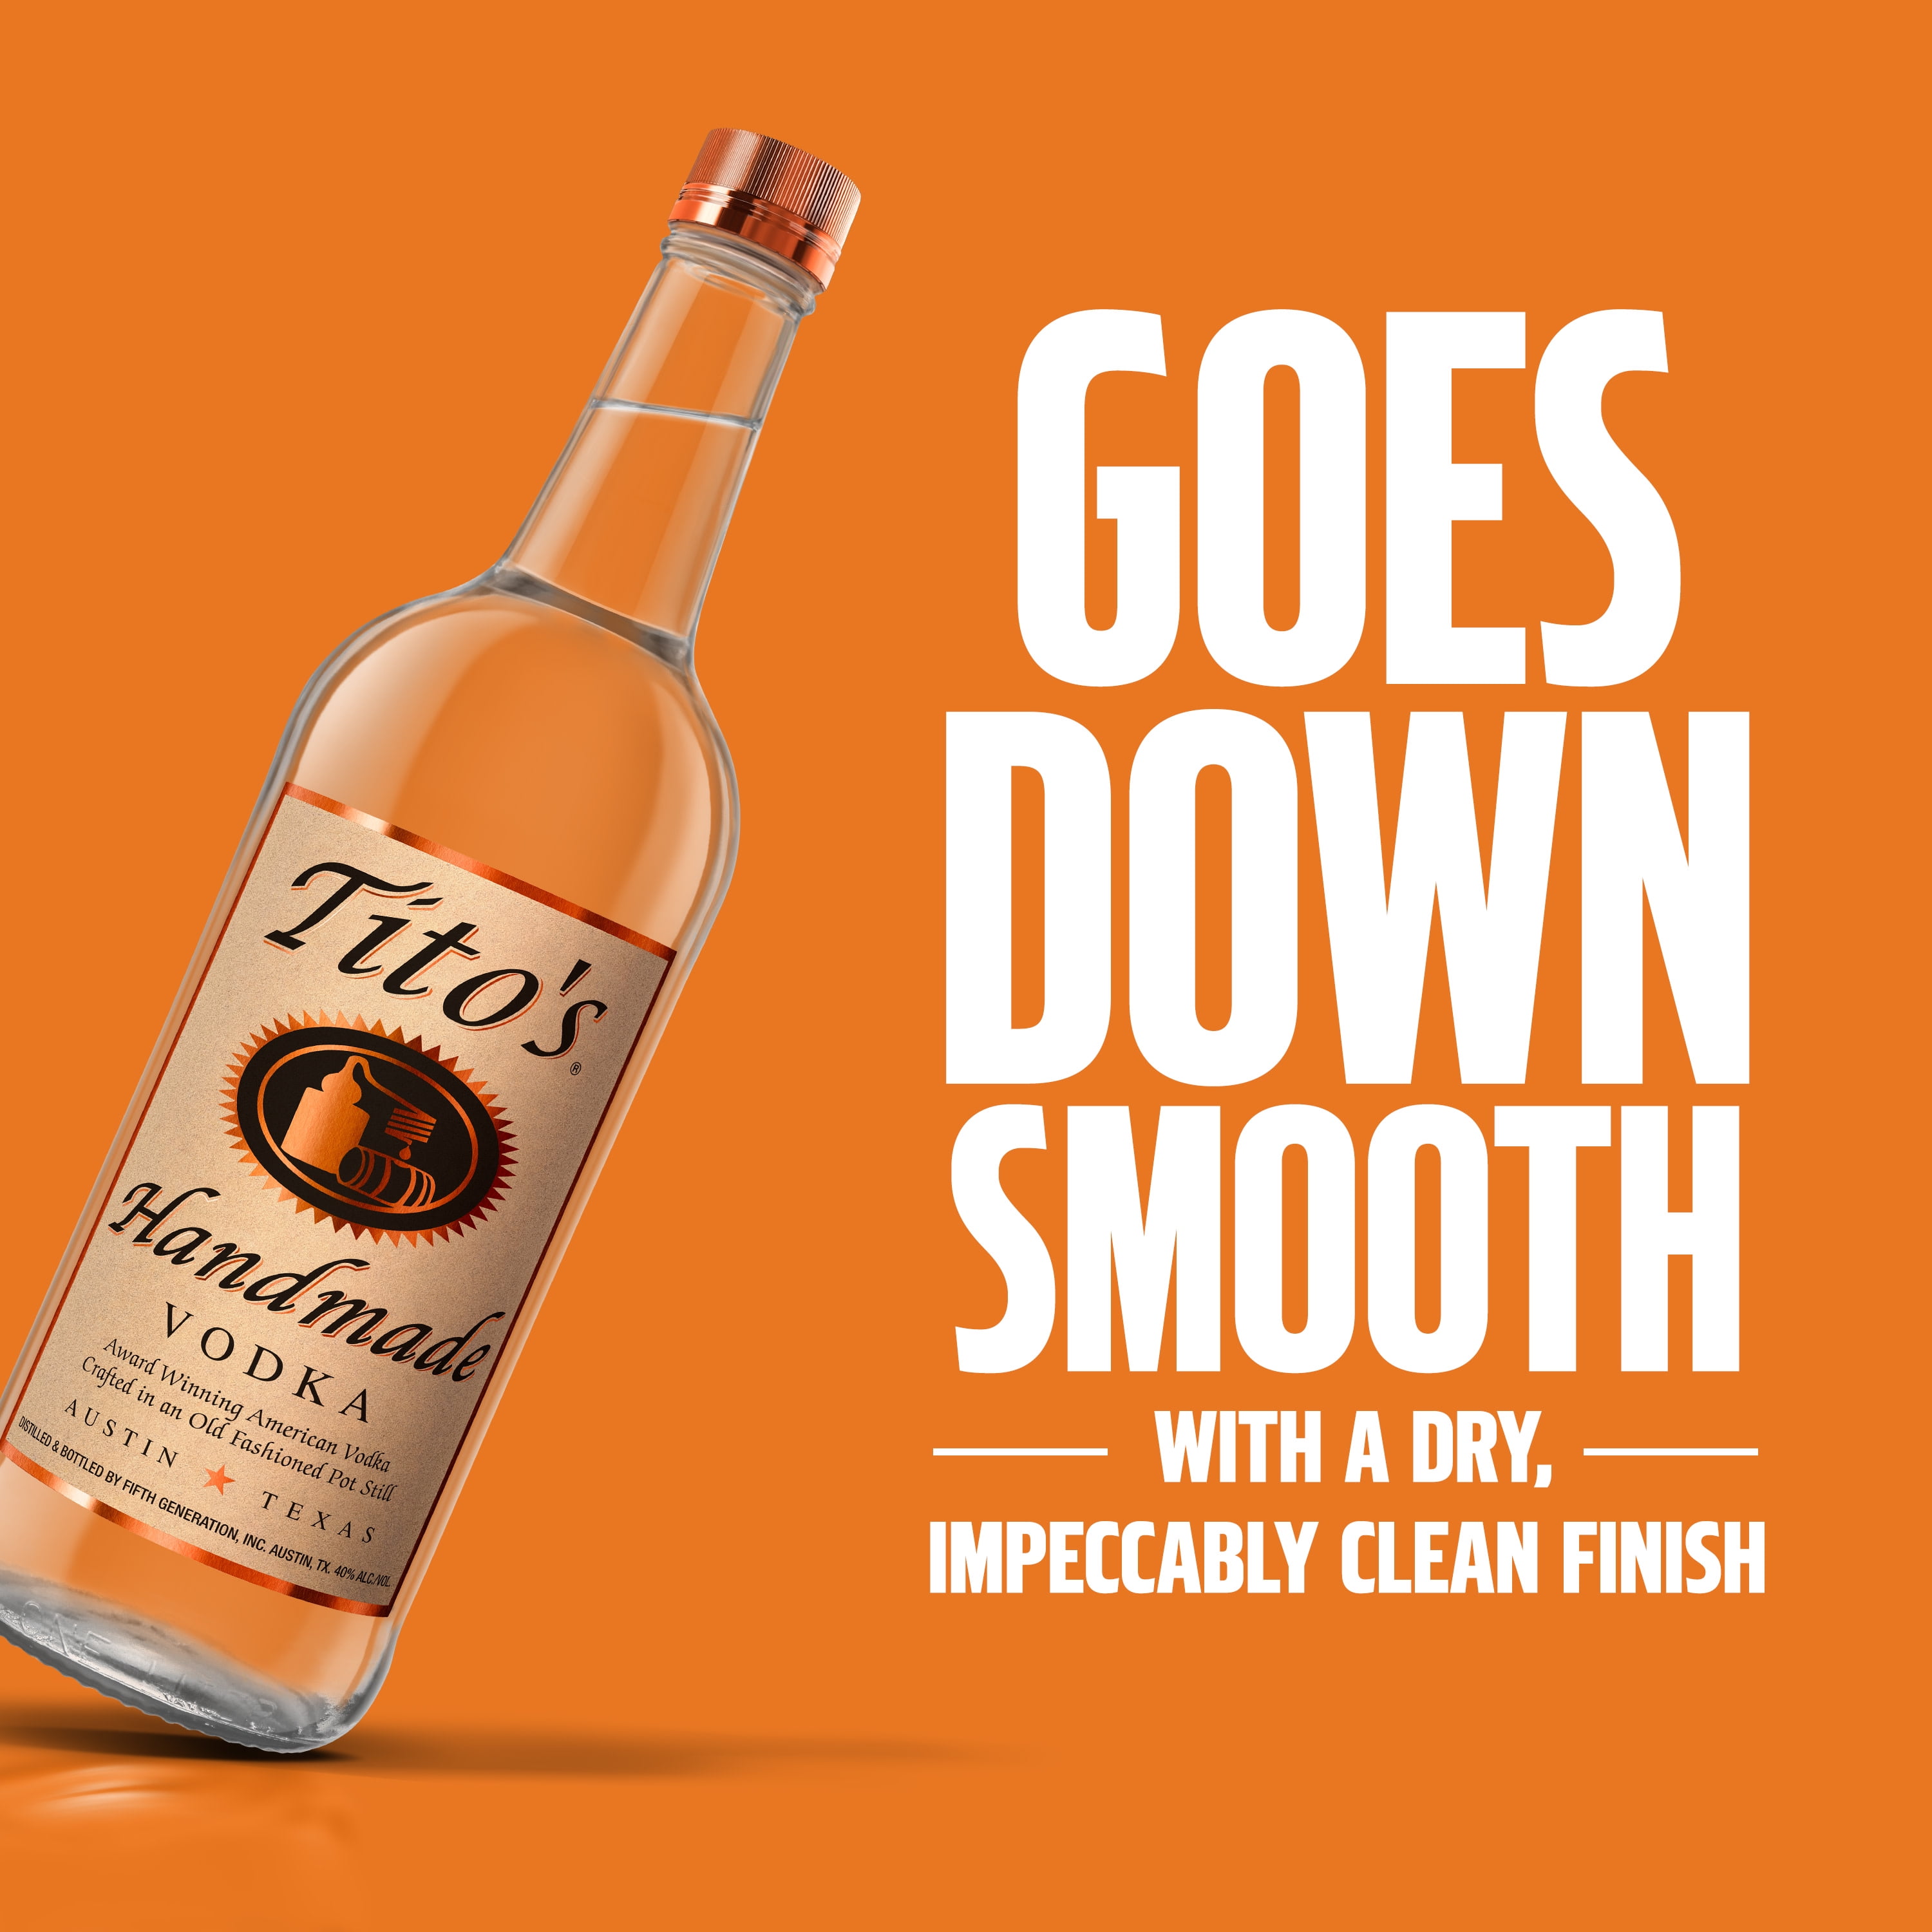 Handle of Tito's Price: Exploring Bottle Sizes